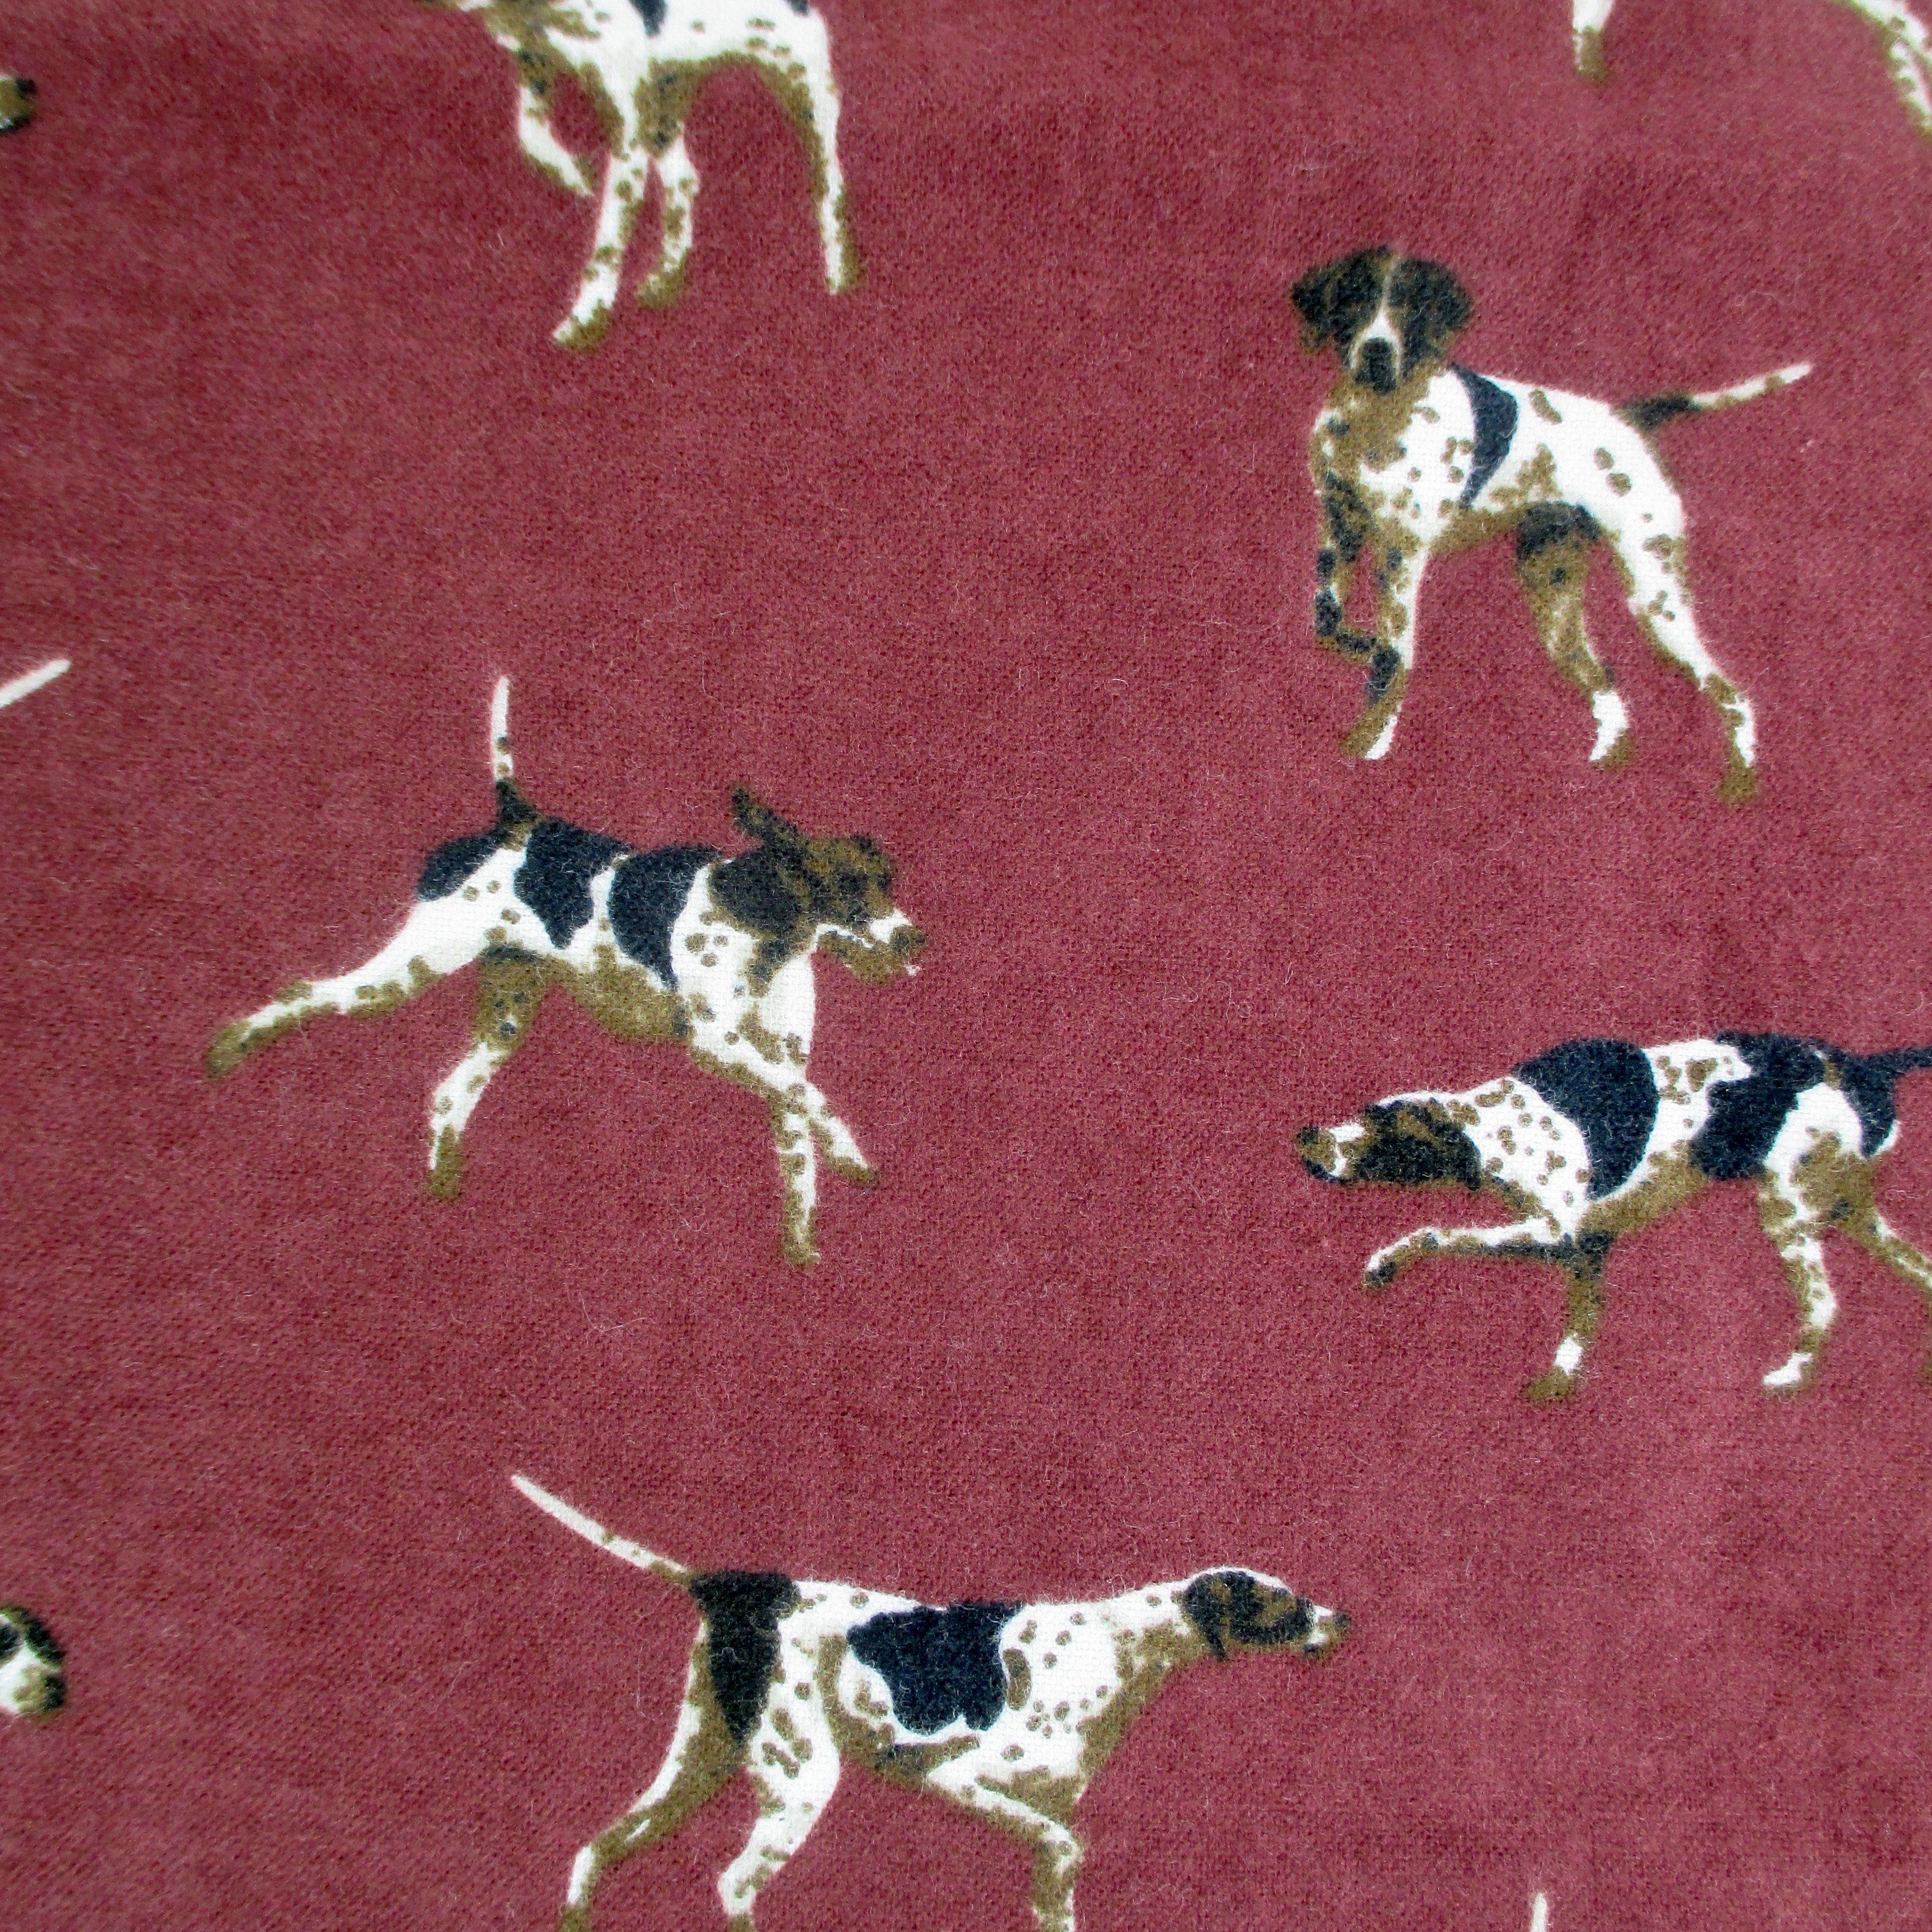 Jack Russell Hound Dog Patterned Flannel Pants for Men in Dark Red